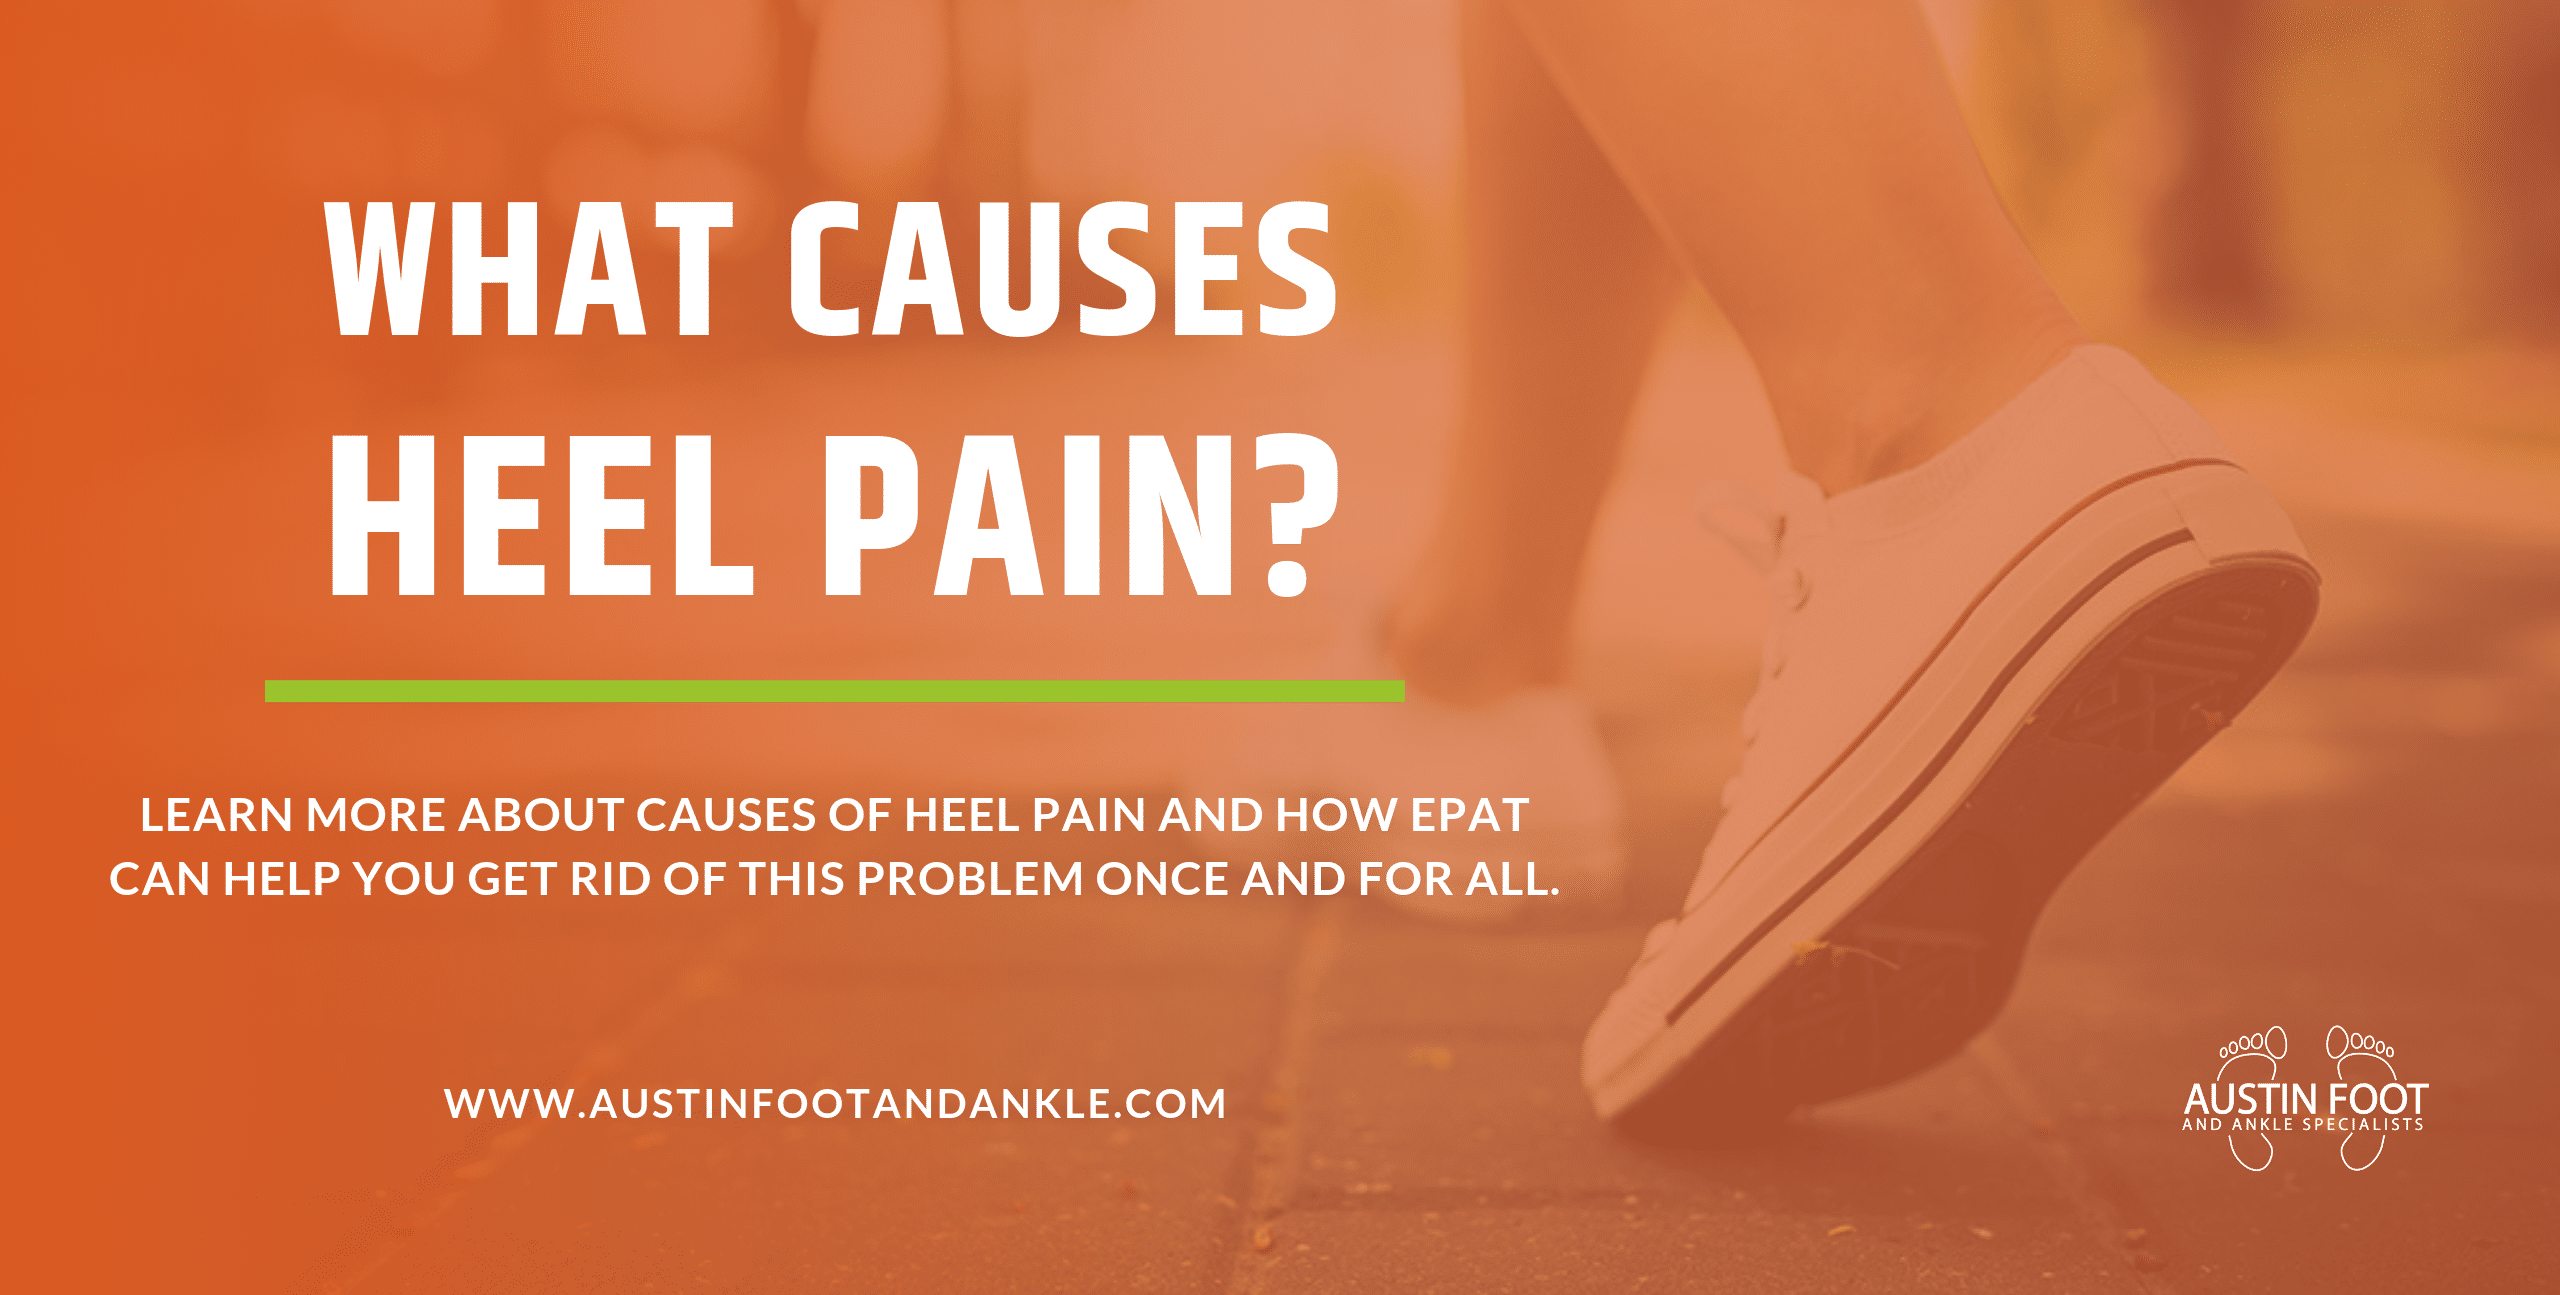 What causes foot pain? Foot Pain Causes, Symptoms and Treatments - YouTube